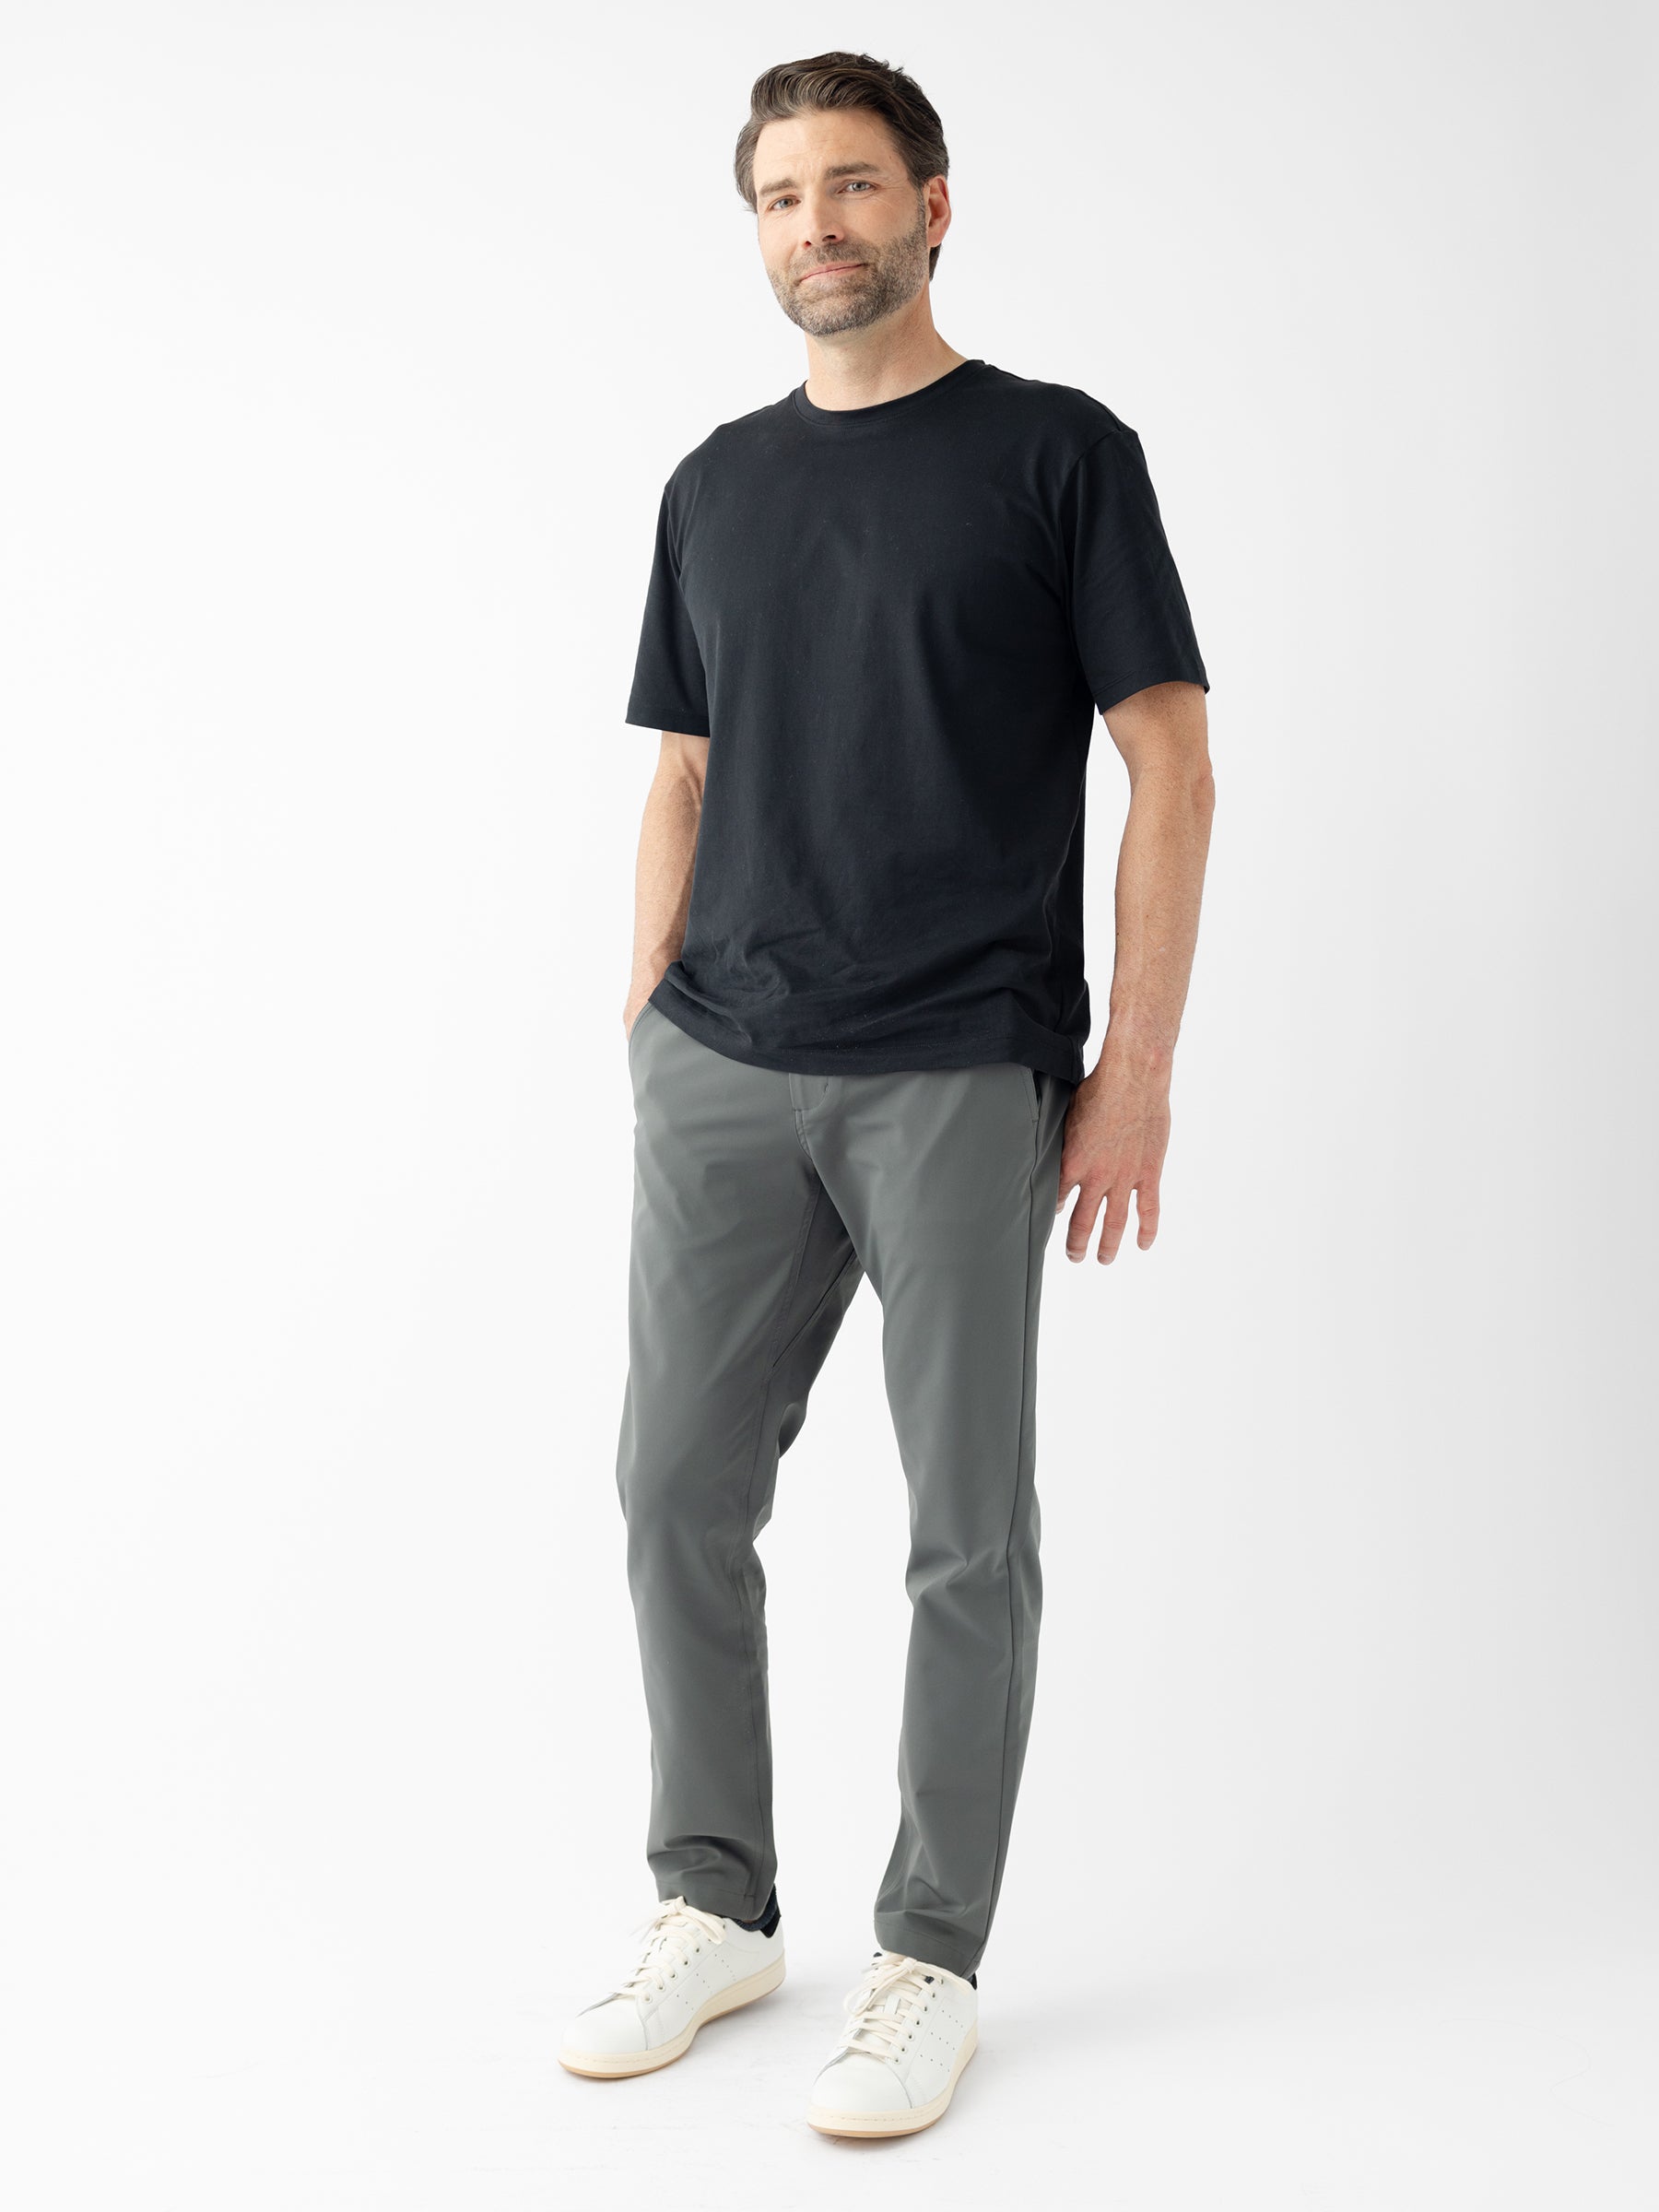 A man stands against a plain white background, casually dressed in a black t-shirt, Cozy Earth's Men's Everywhere Pant 30L in gray, and white sneakers. With his hands in his pockets, short dark hair, and a beard, he looks slightly off to the side with a neutral expression. |Color:Coal